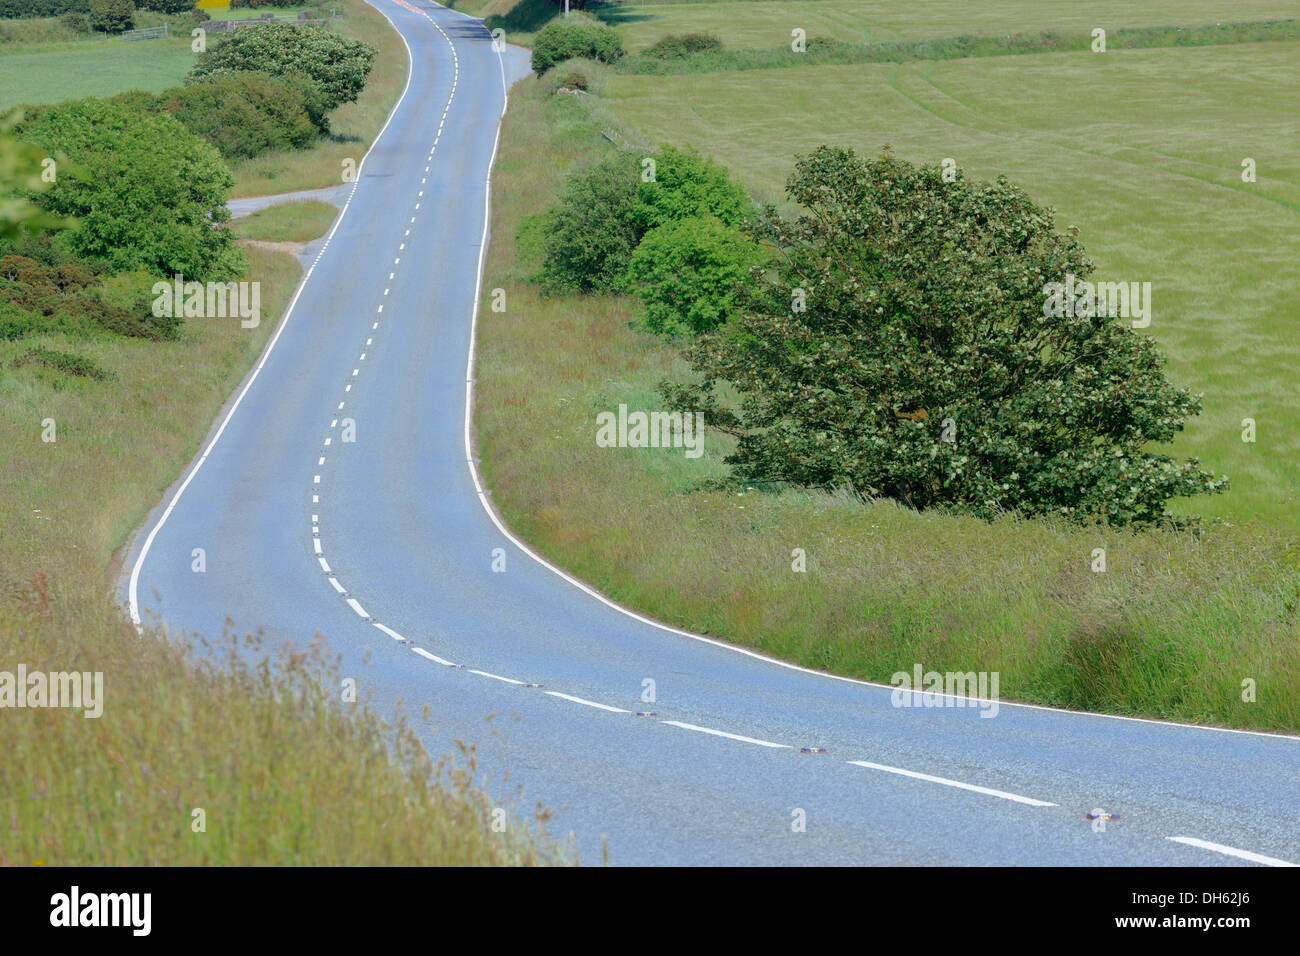 empty road running through rural countryside Stock Photo